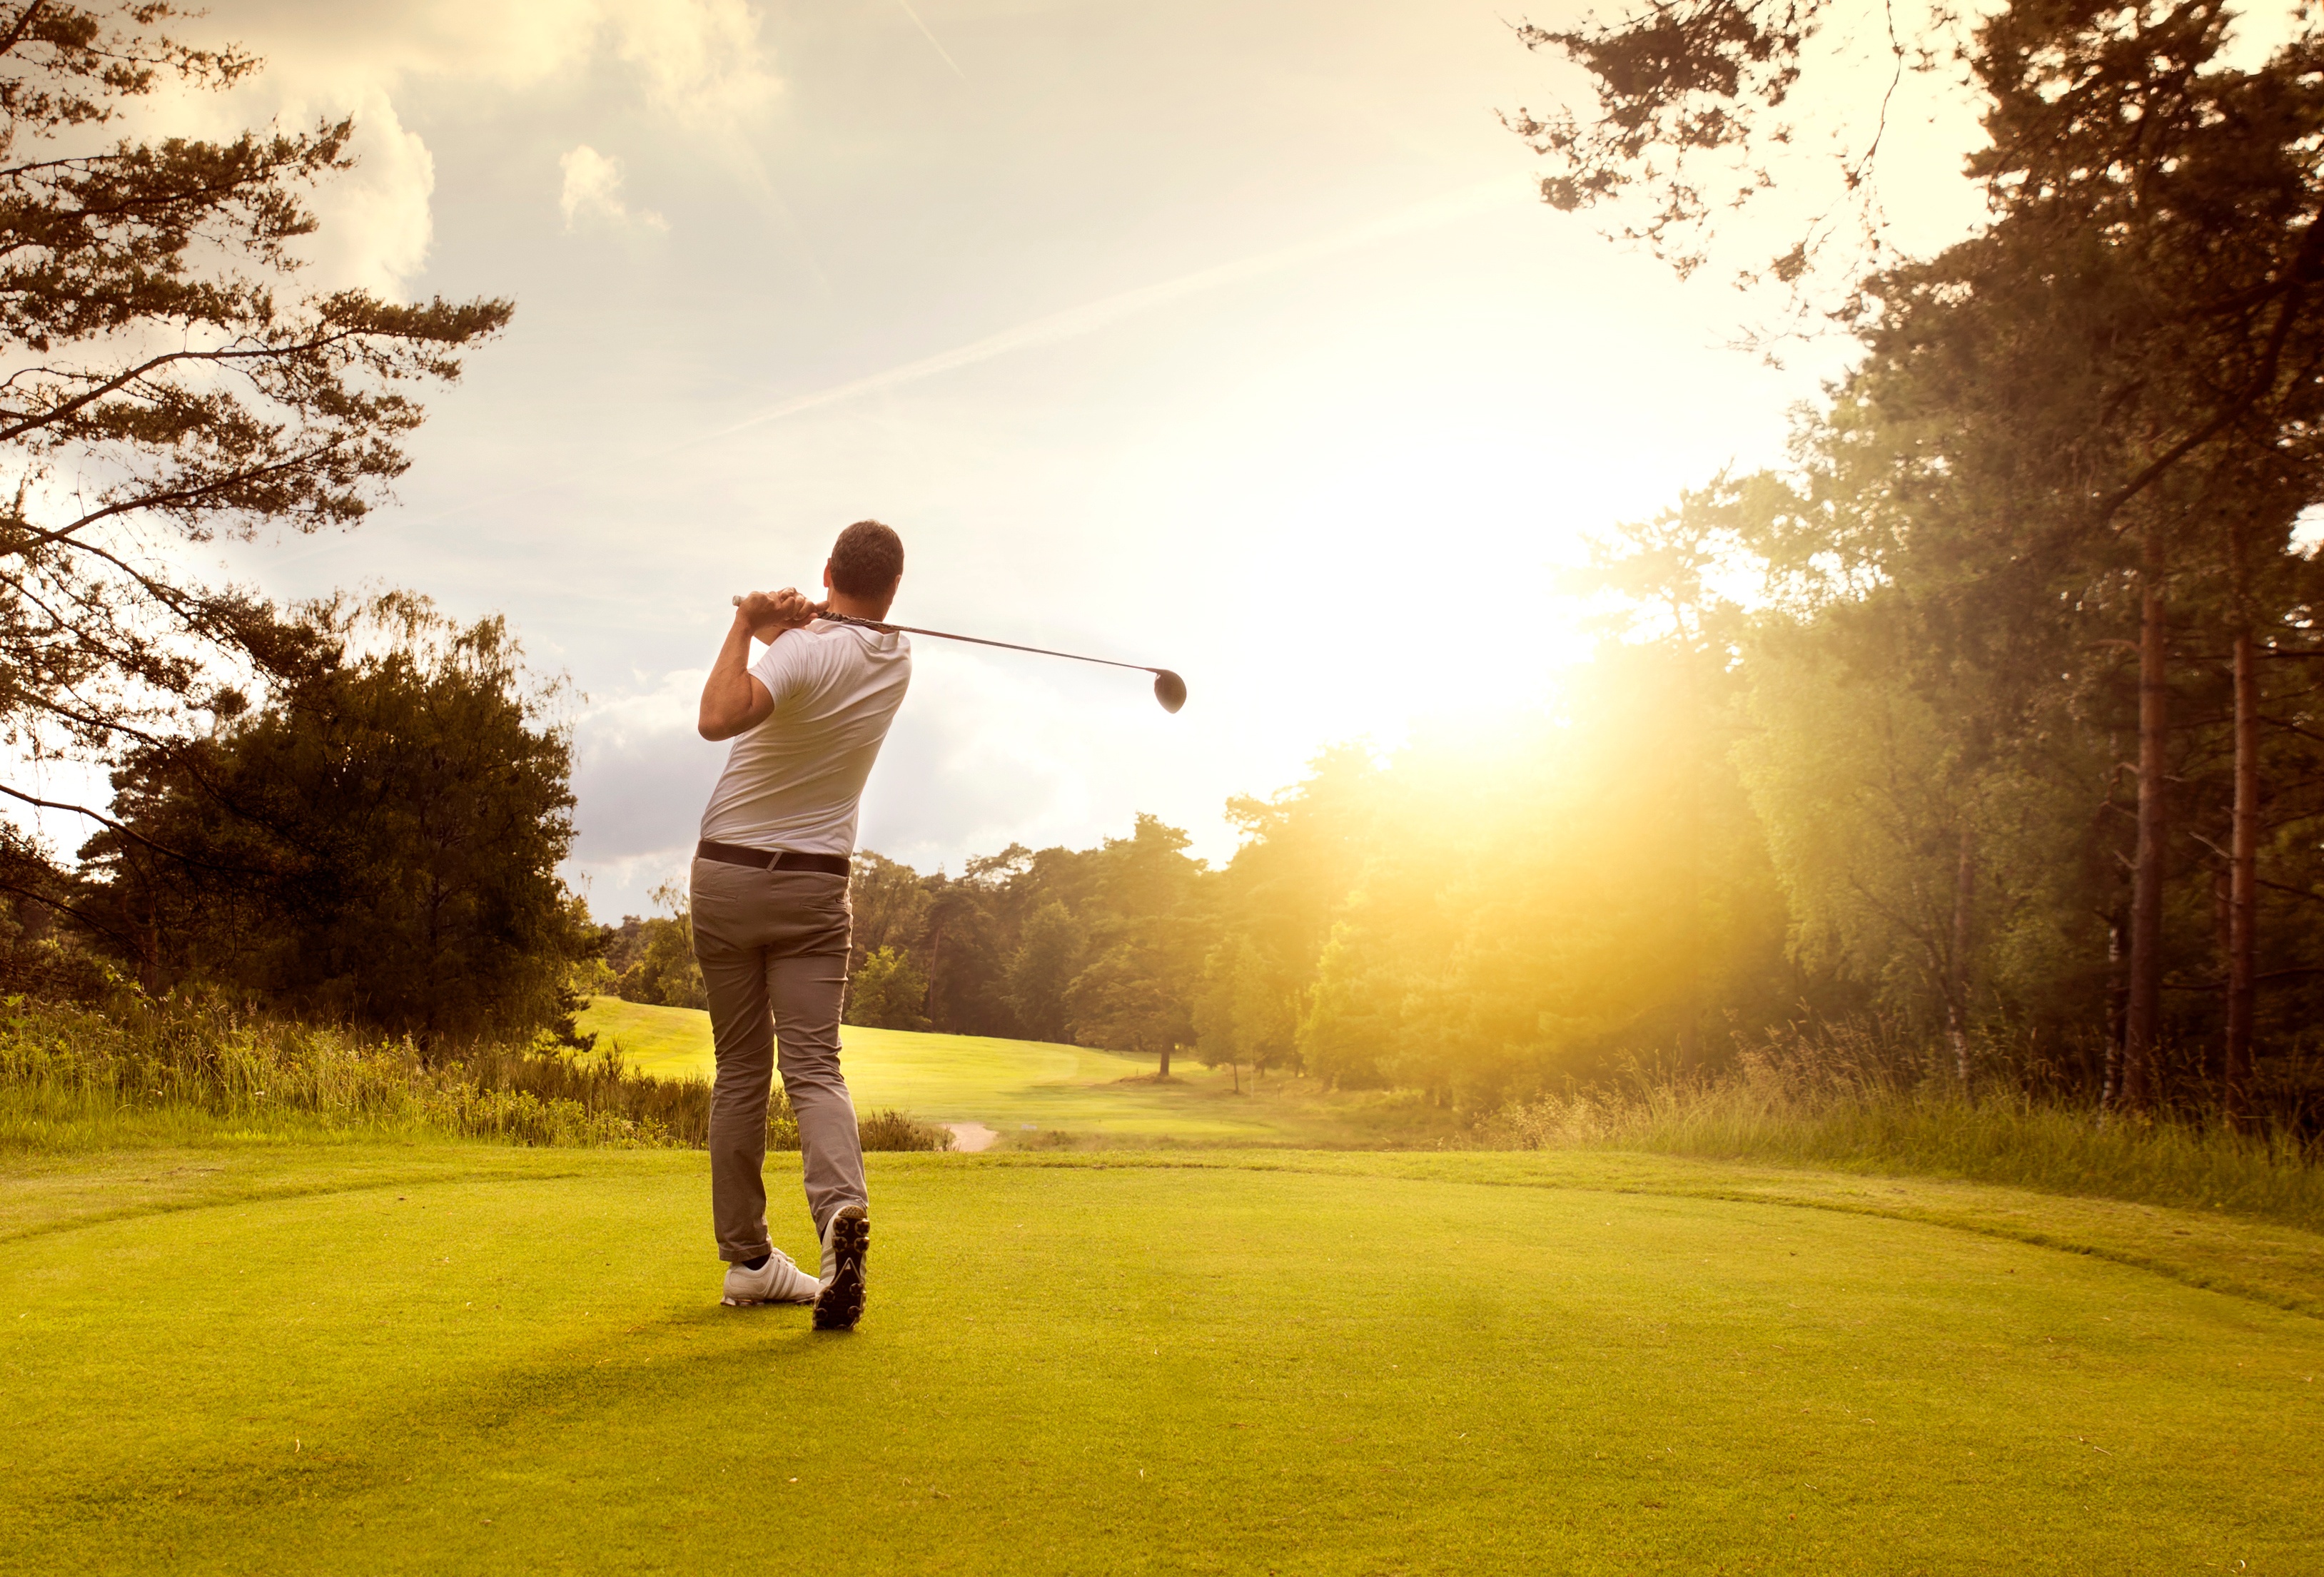 As most golfers know, mosquitoes are just another hazard to deal with when out on the golf course. 